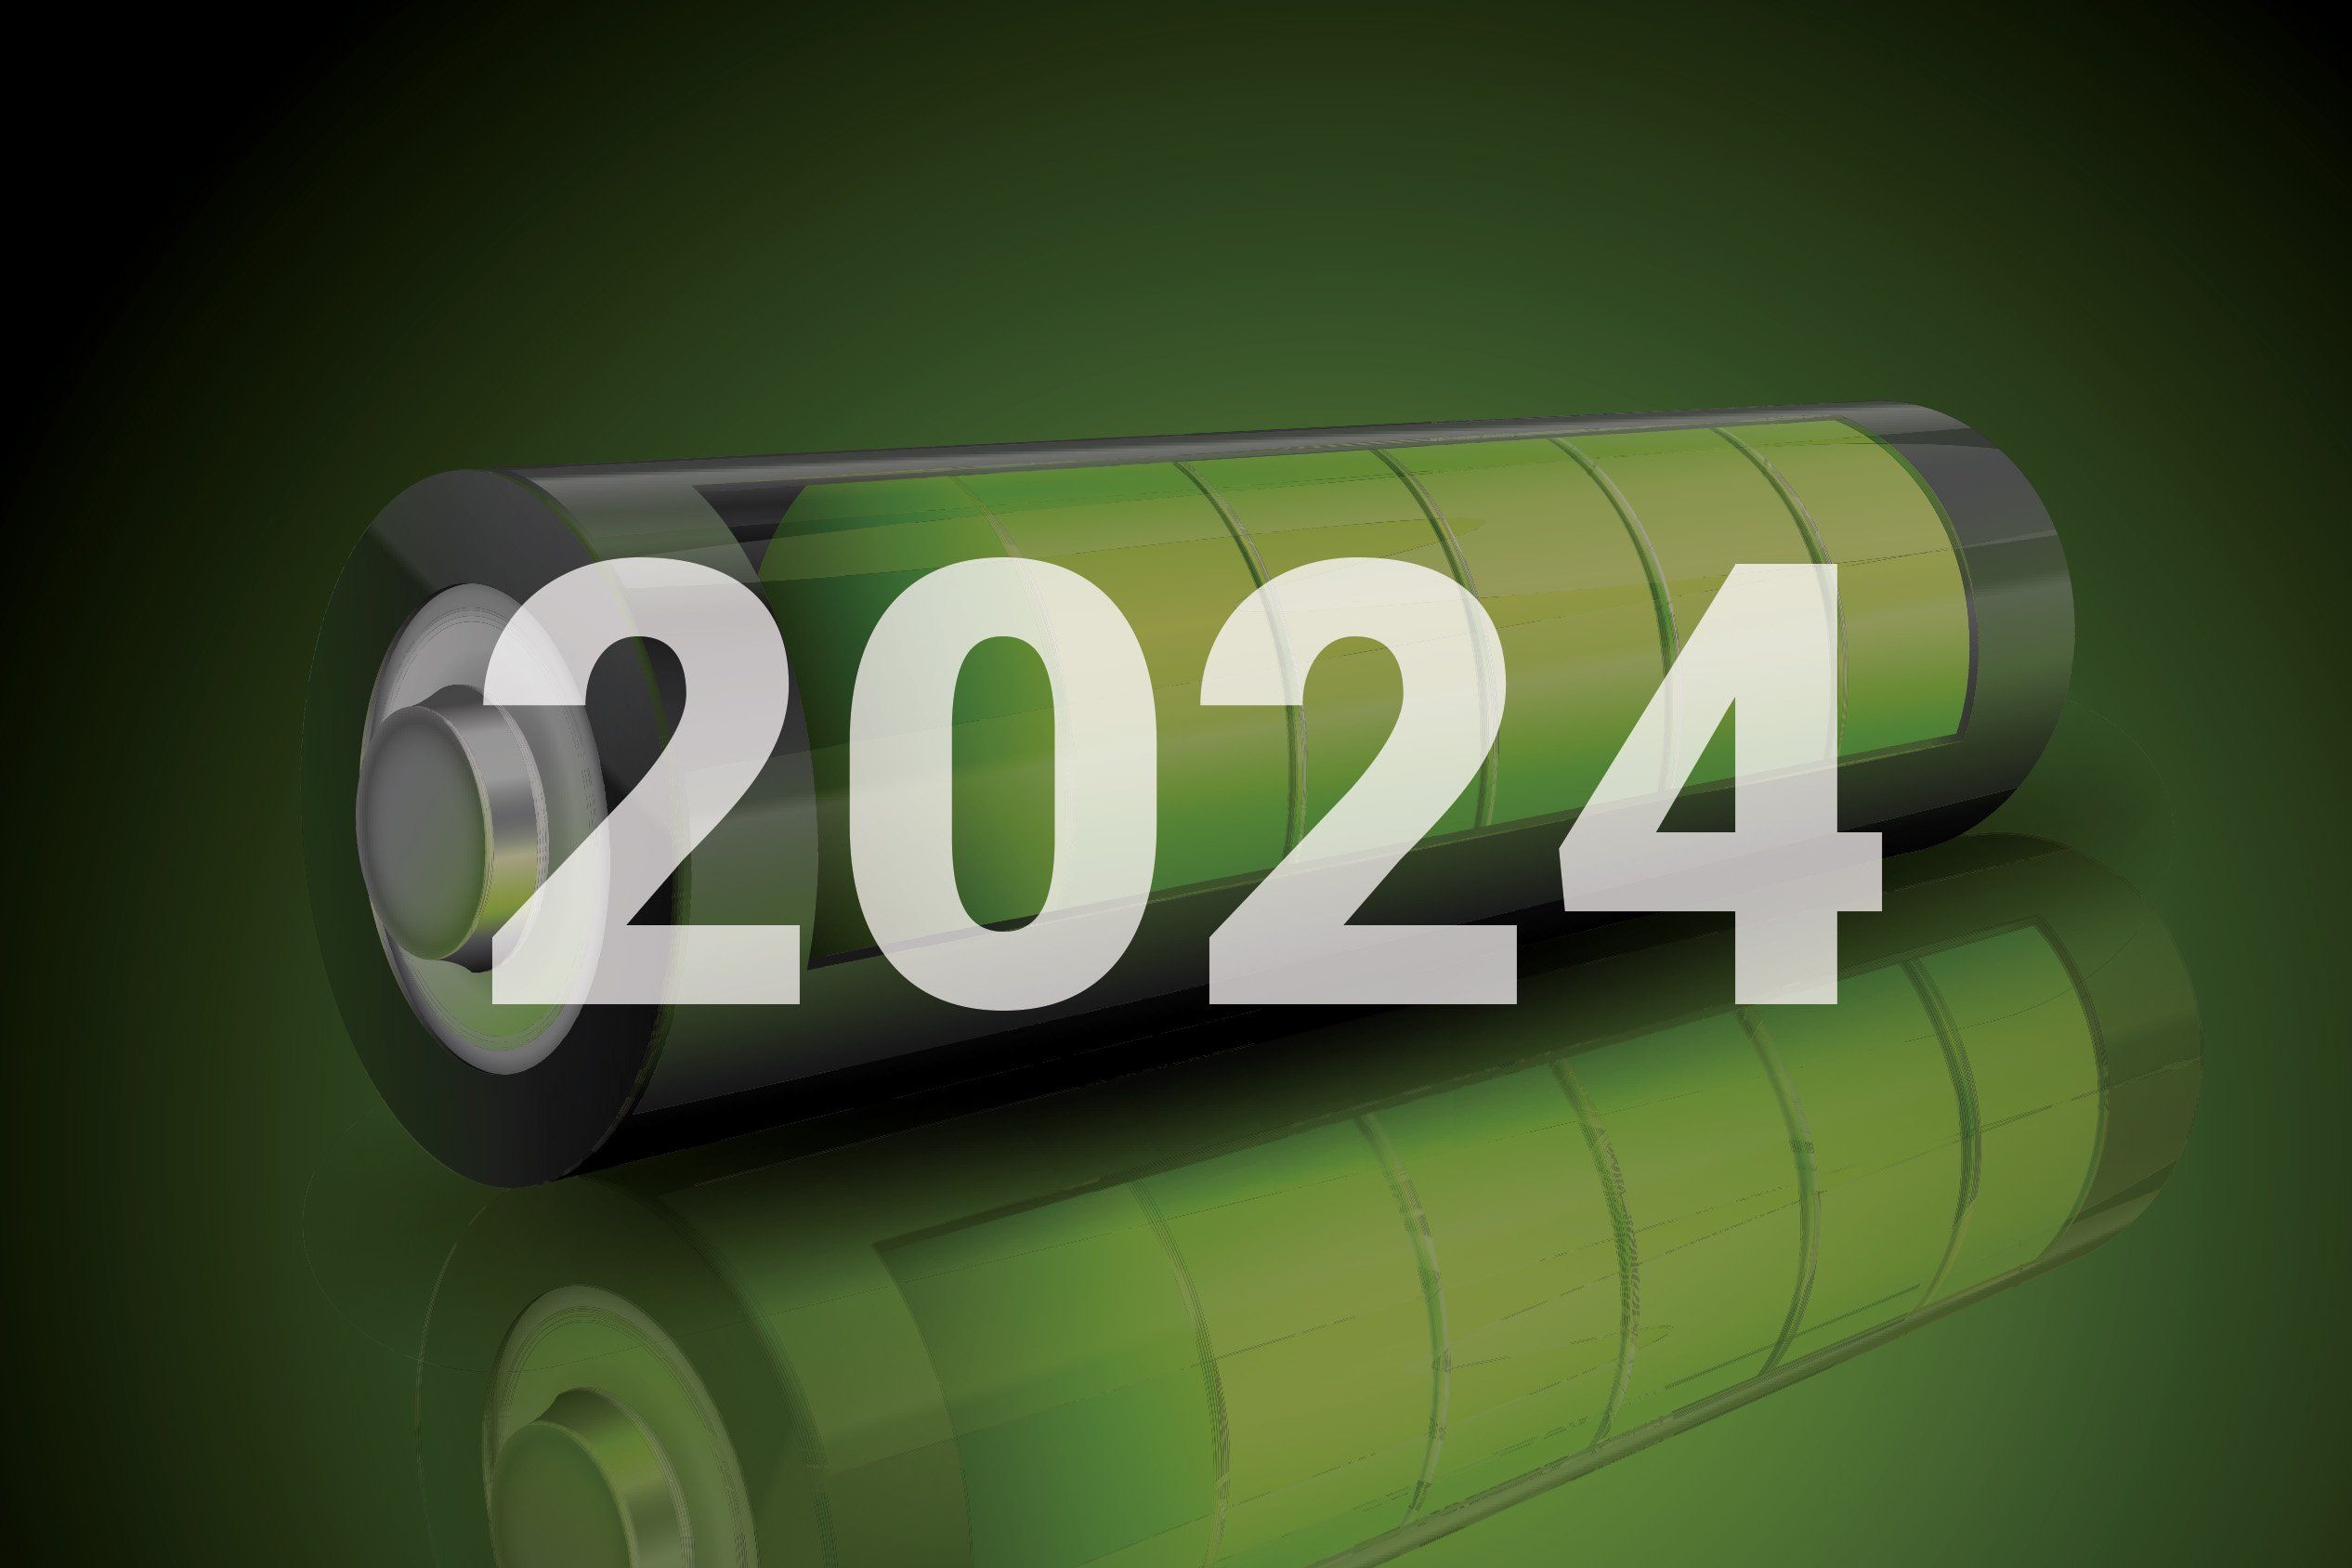 Green lithium-ion battery with "2024" overlay.